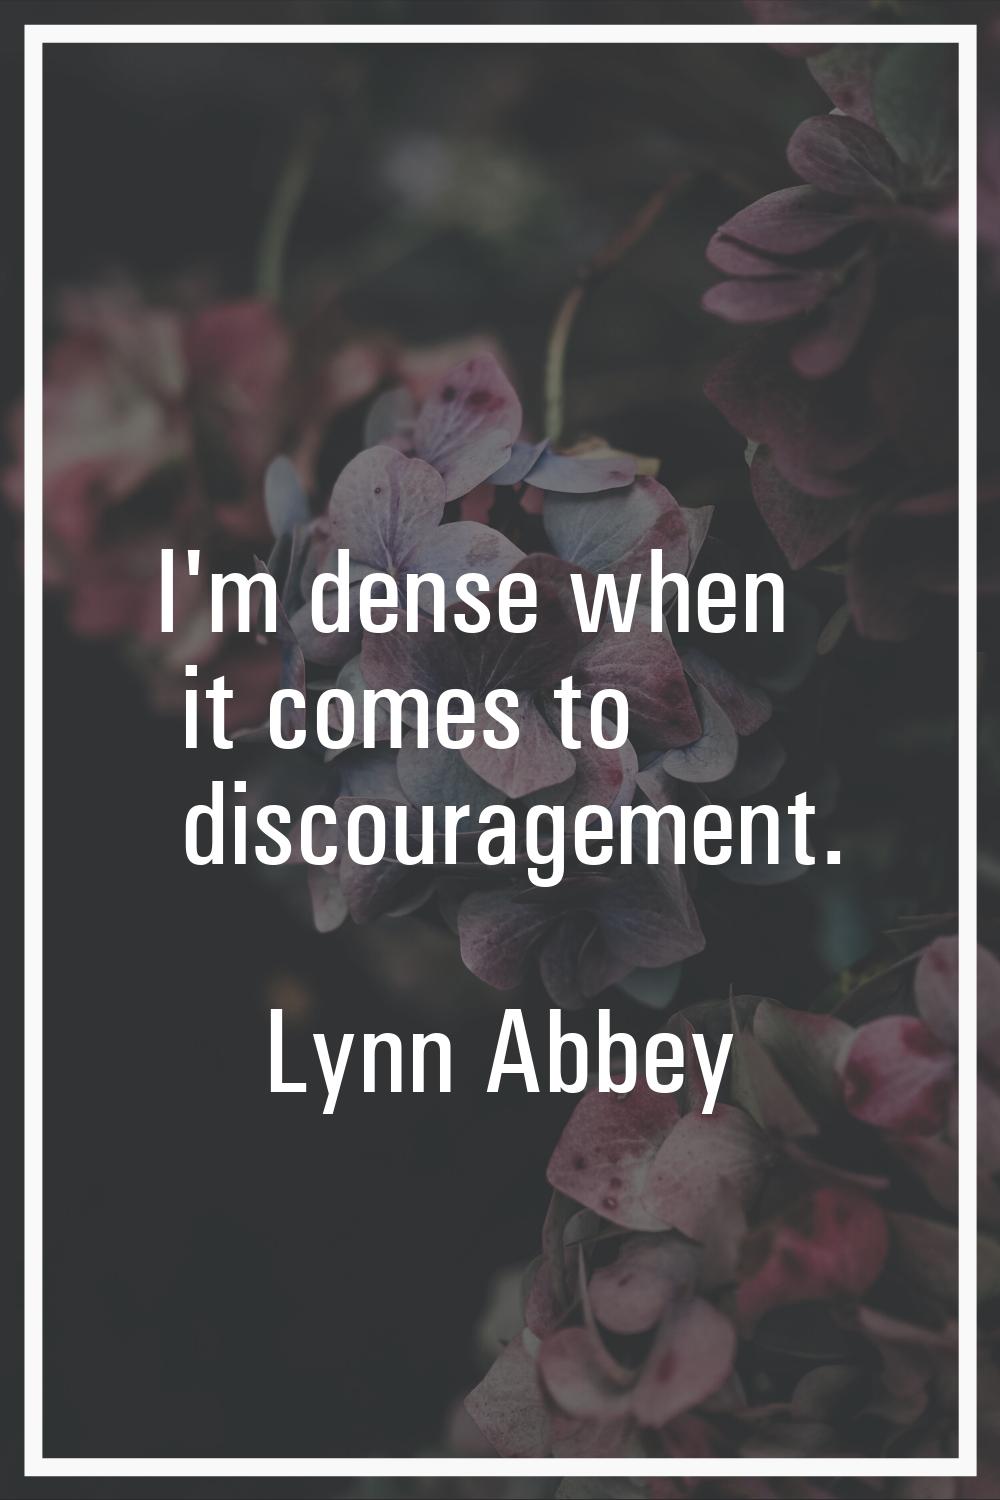 I'm dense when it comes to discouragement.